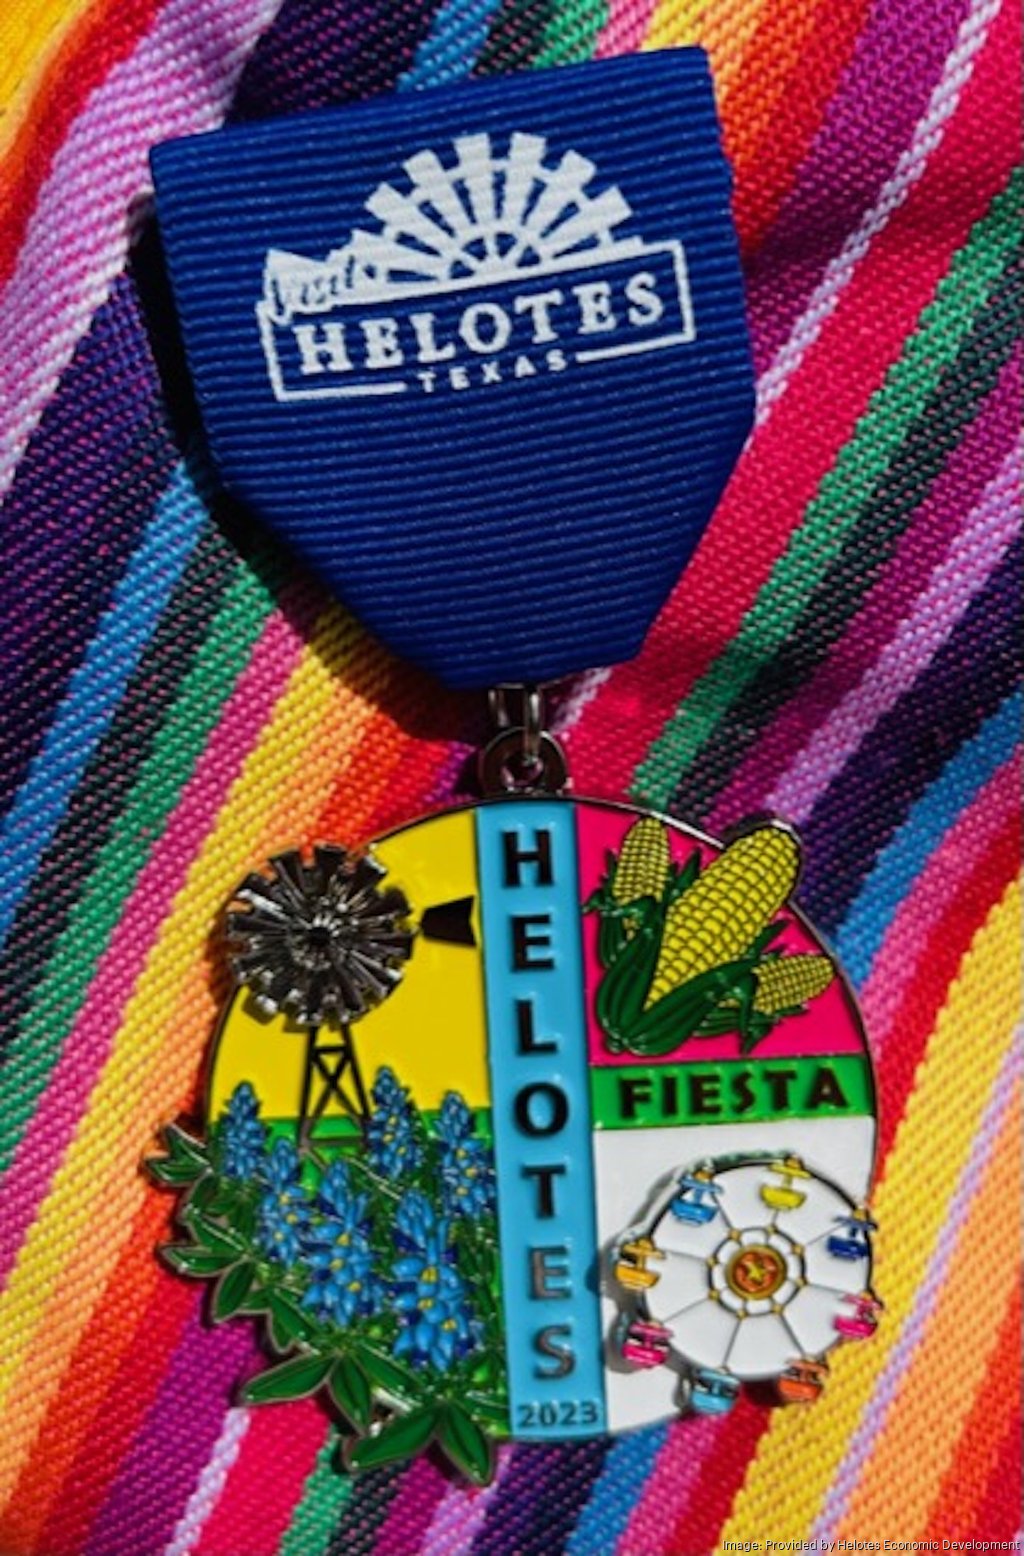 Last chance: Submissions open for 2023 Fiesta Medal contest - San Antonio  Business Journal